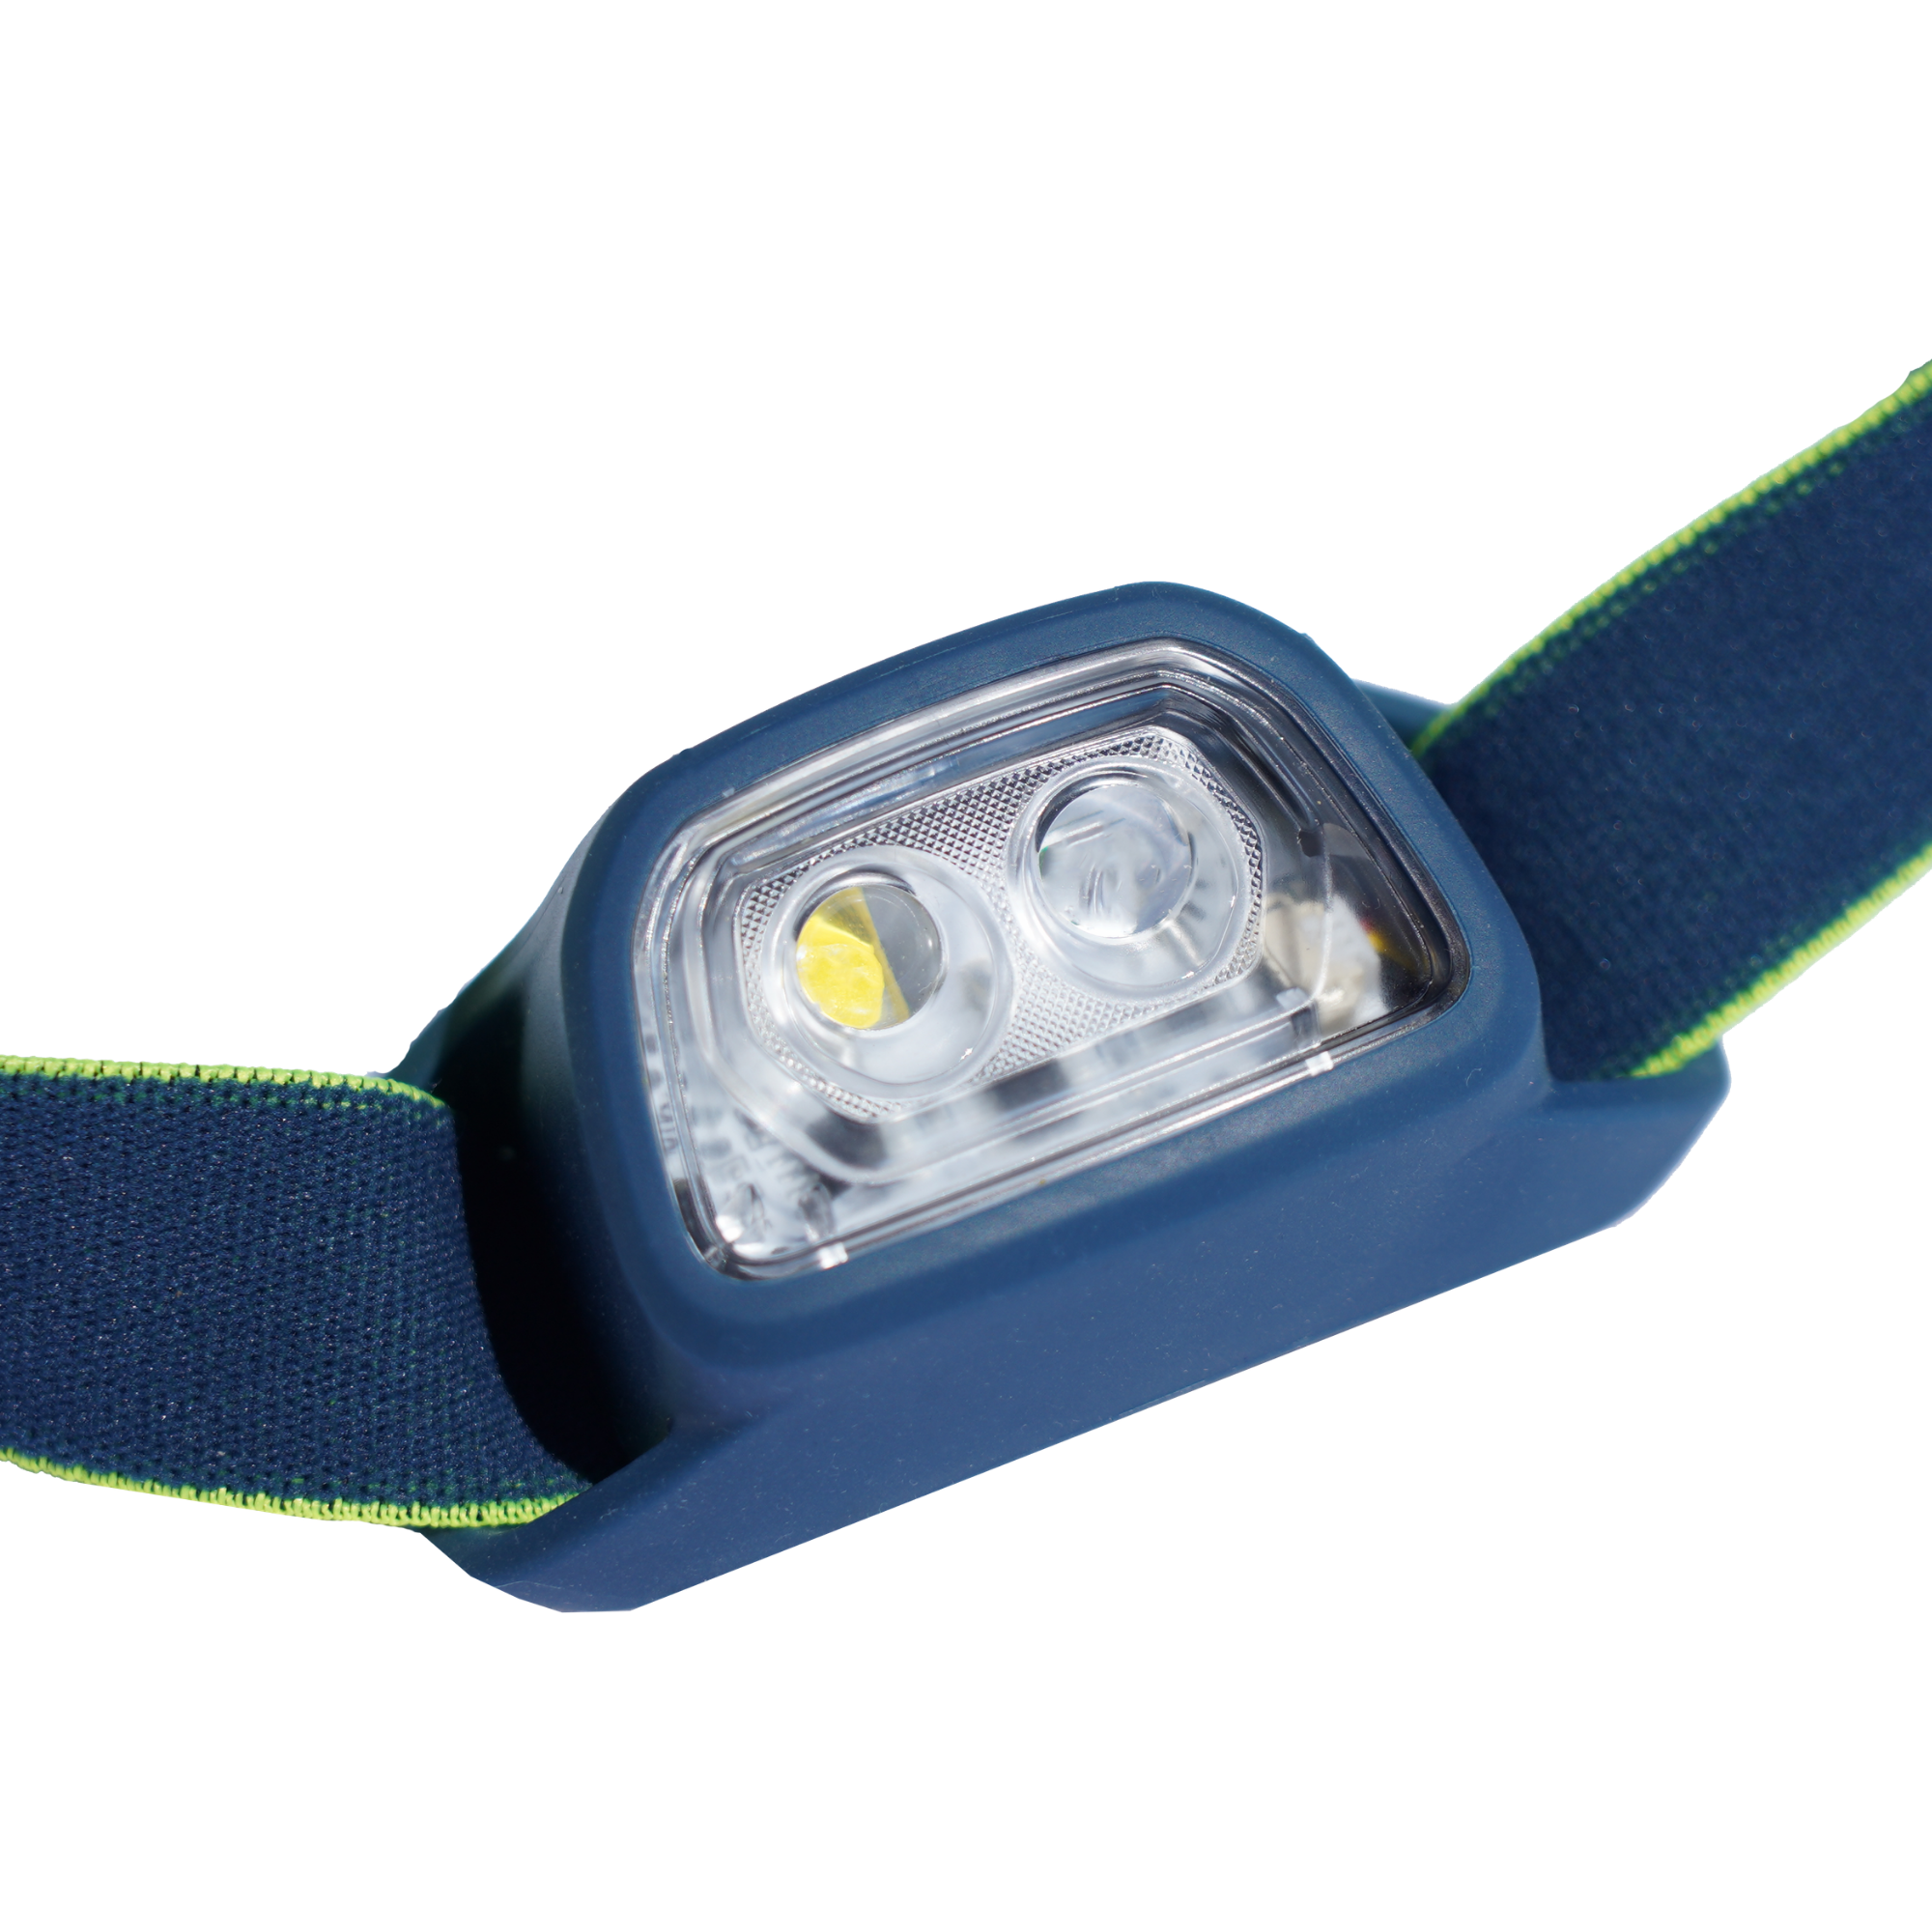 Chafik pêche - LAMPE FRONTALE RUNNING ET TRAIL ONNIGHT 410